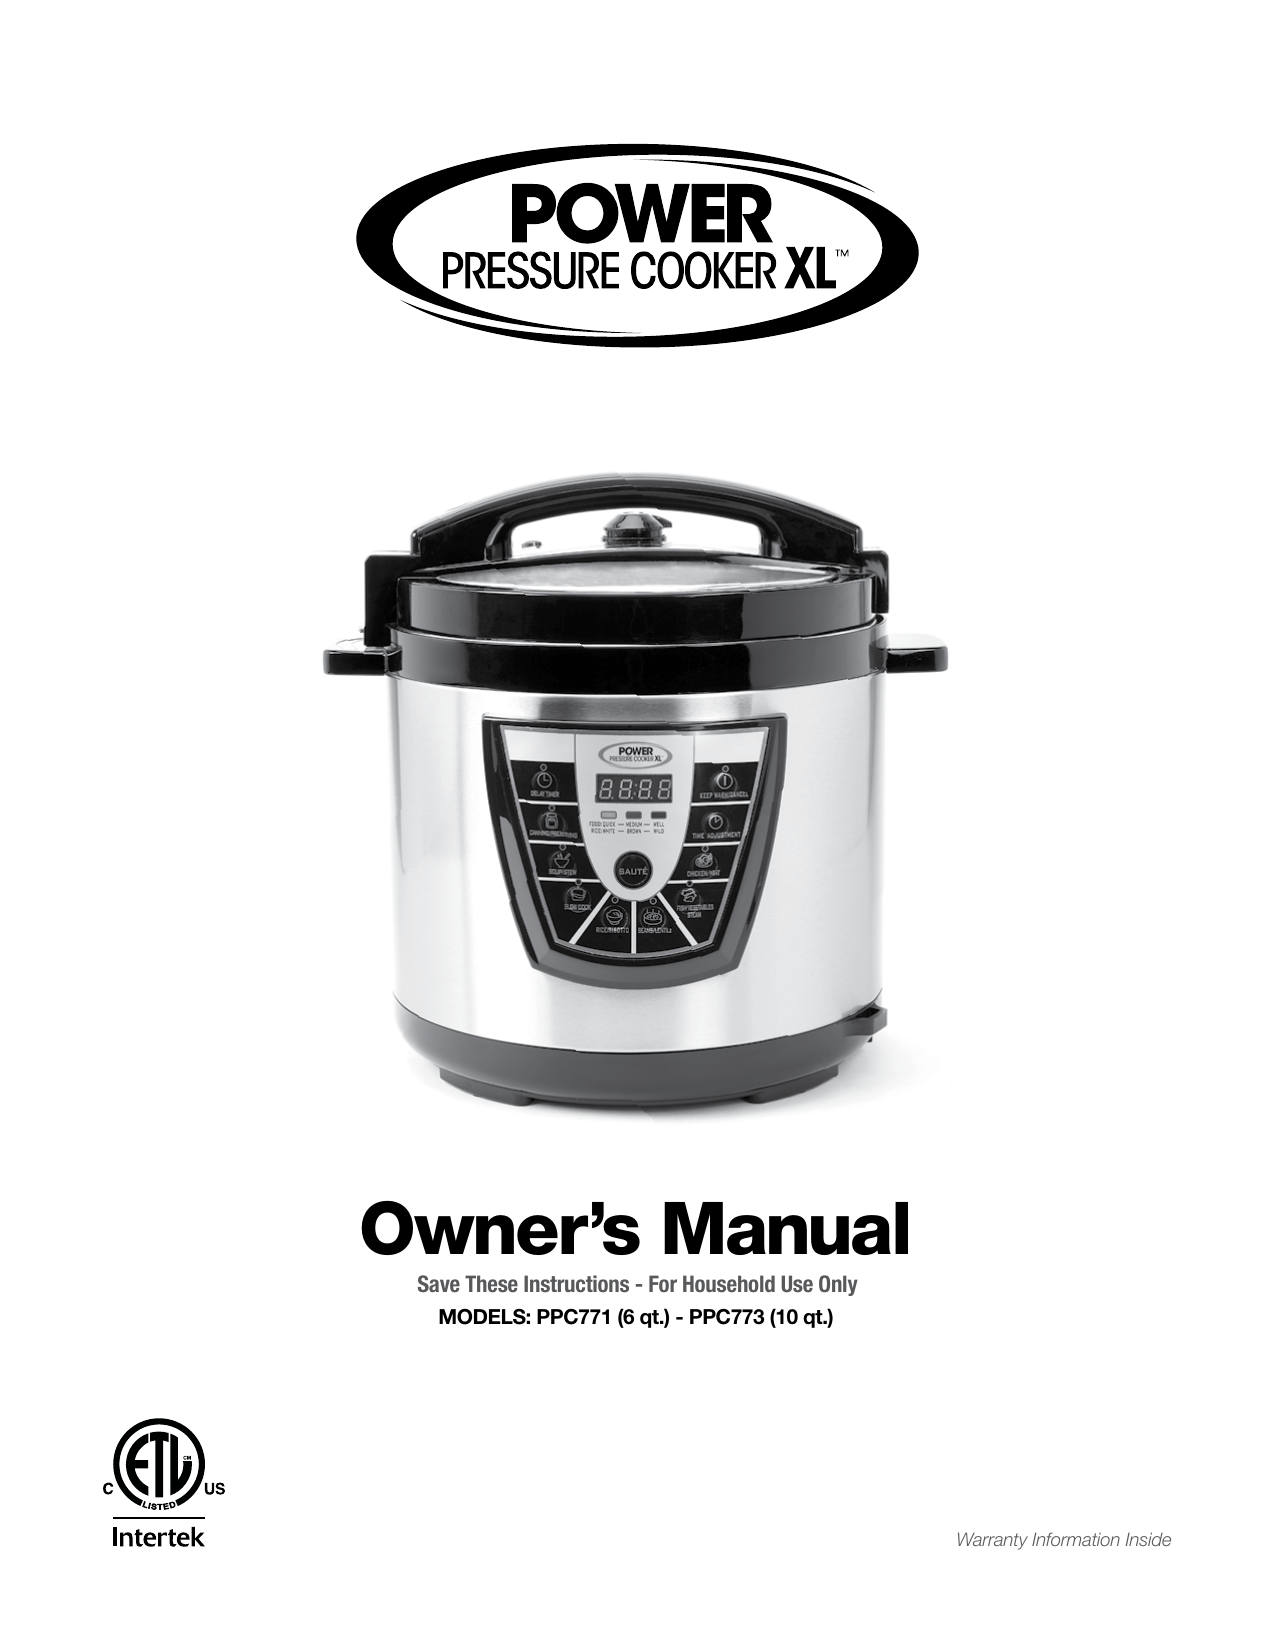 Tristar Power Pressure Cooker XL Manual with canning instructions